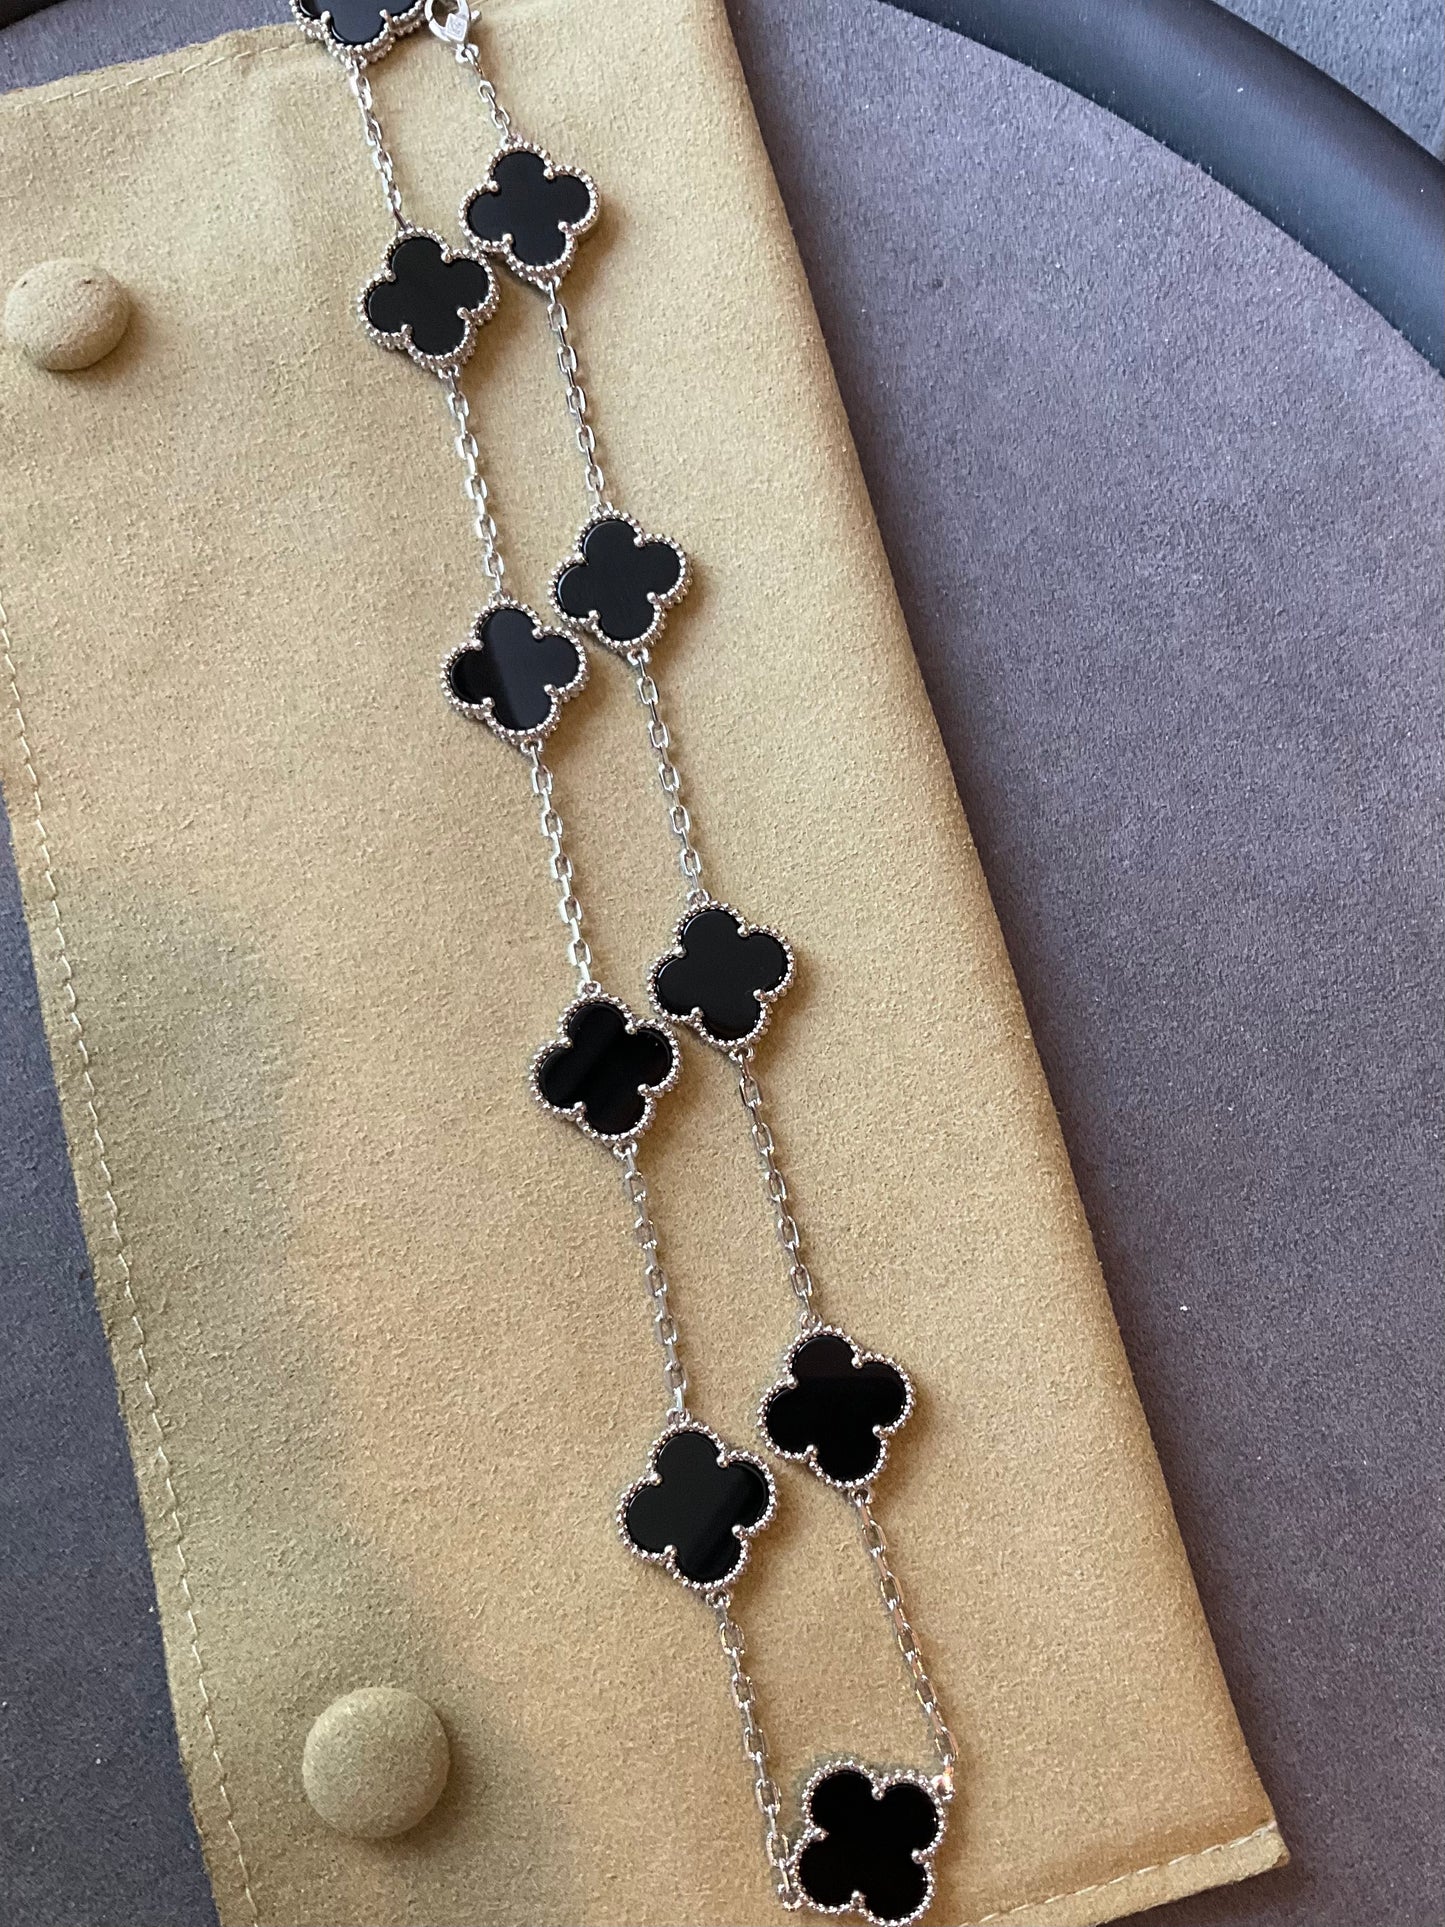 10 motifs onyx 15mm clover necklace 925 silver with 18k white gold plated 42cm - ParadiseKissCo